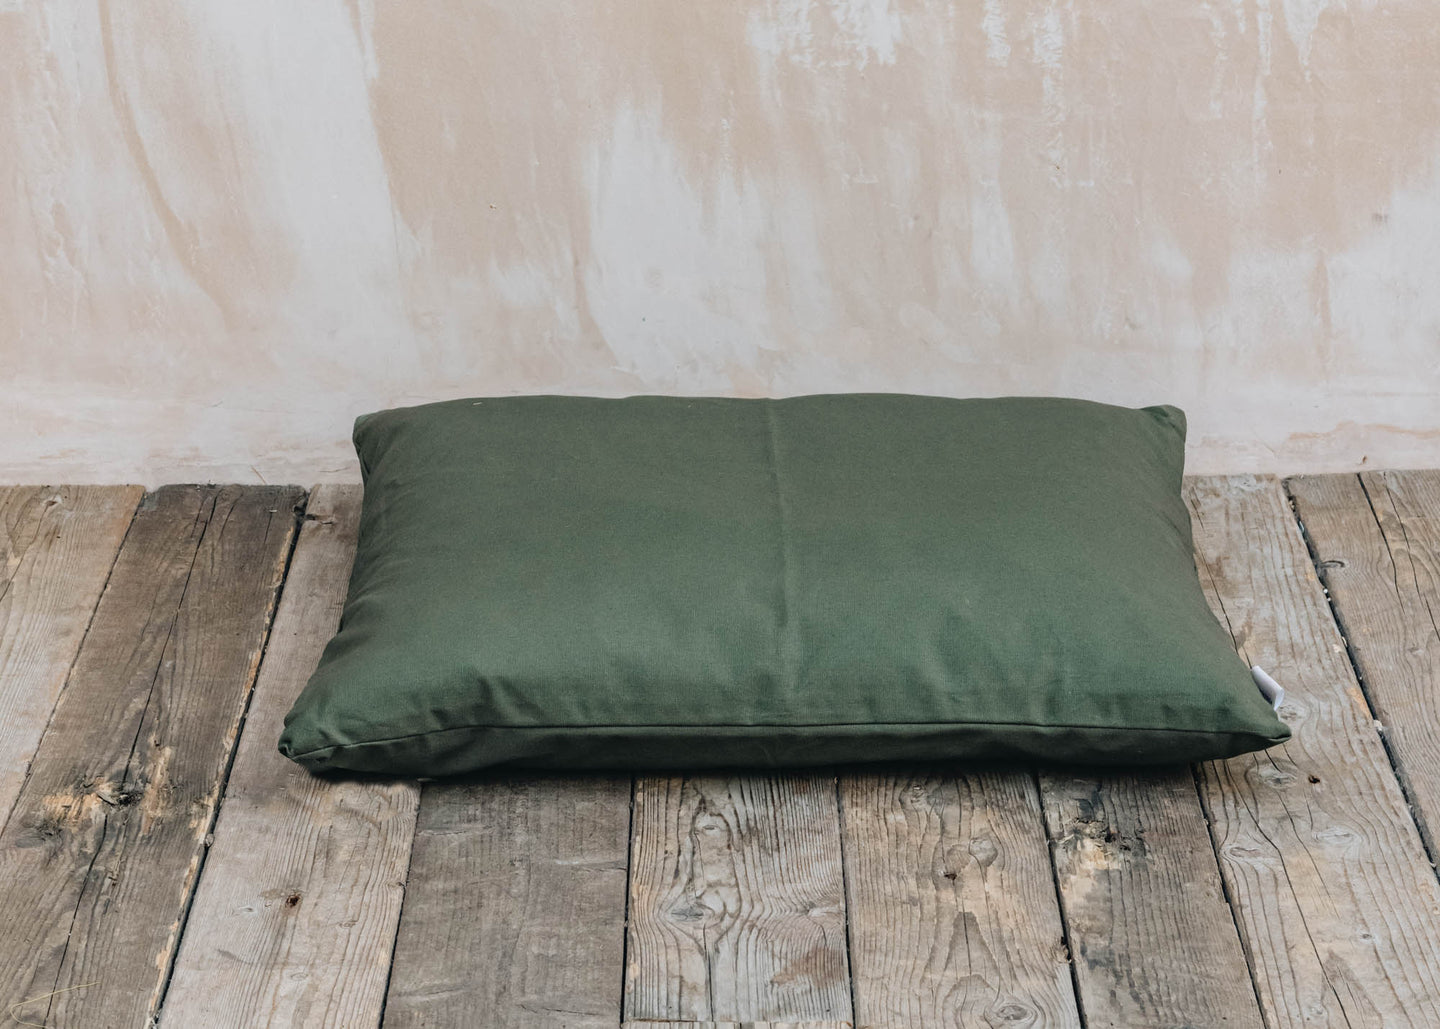 Pooch & Paws Medium Water Resistant Pet Bed in Olive Green